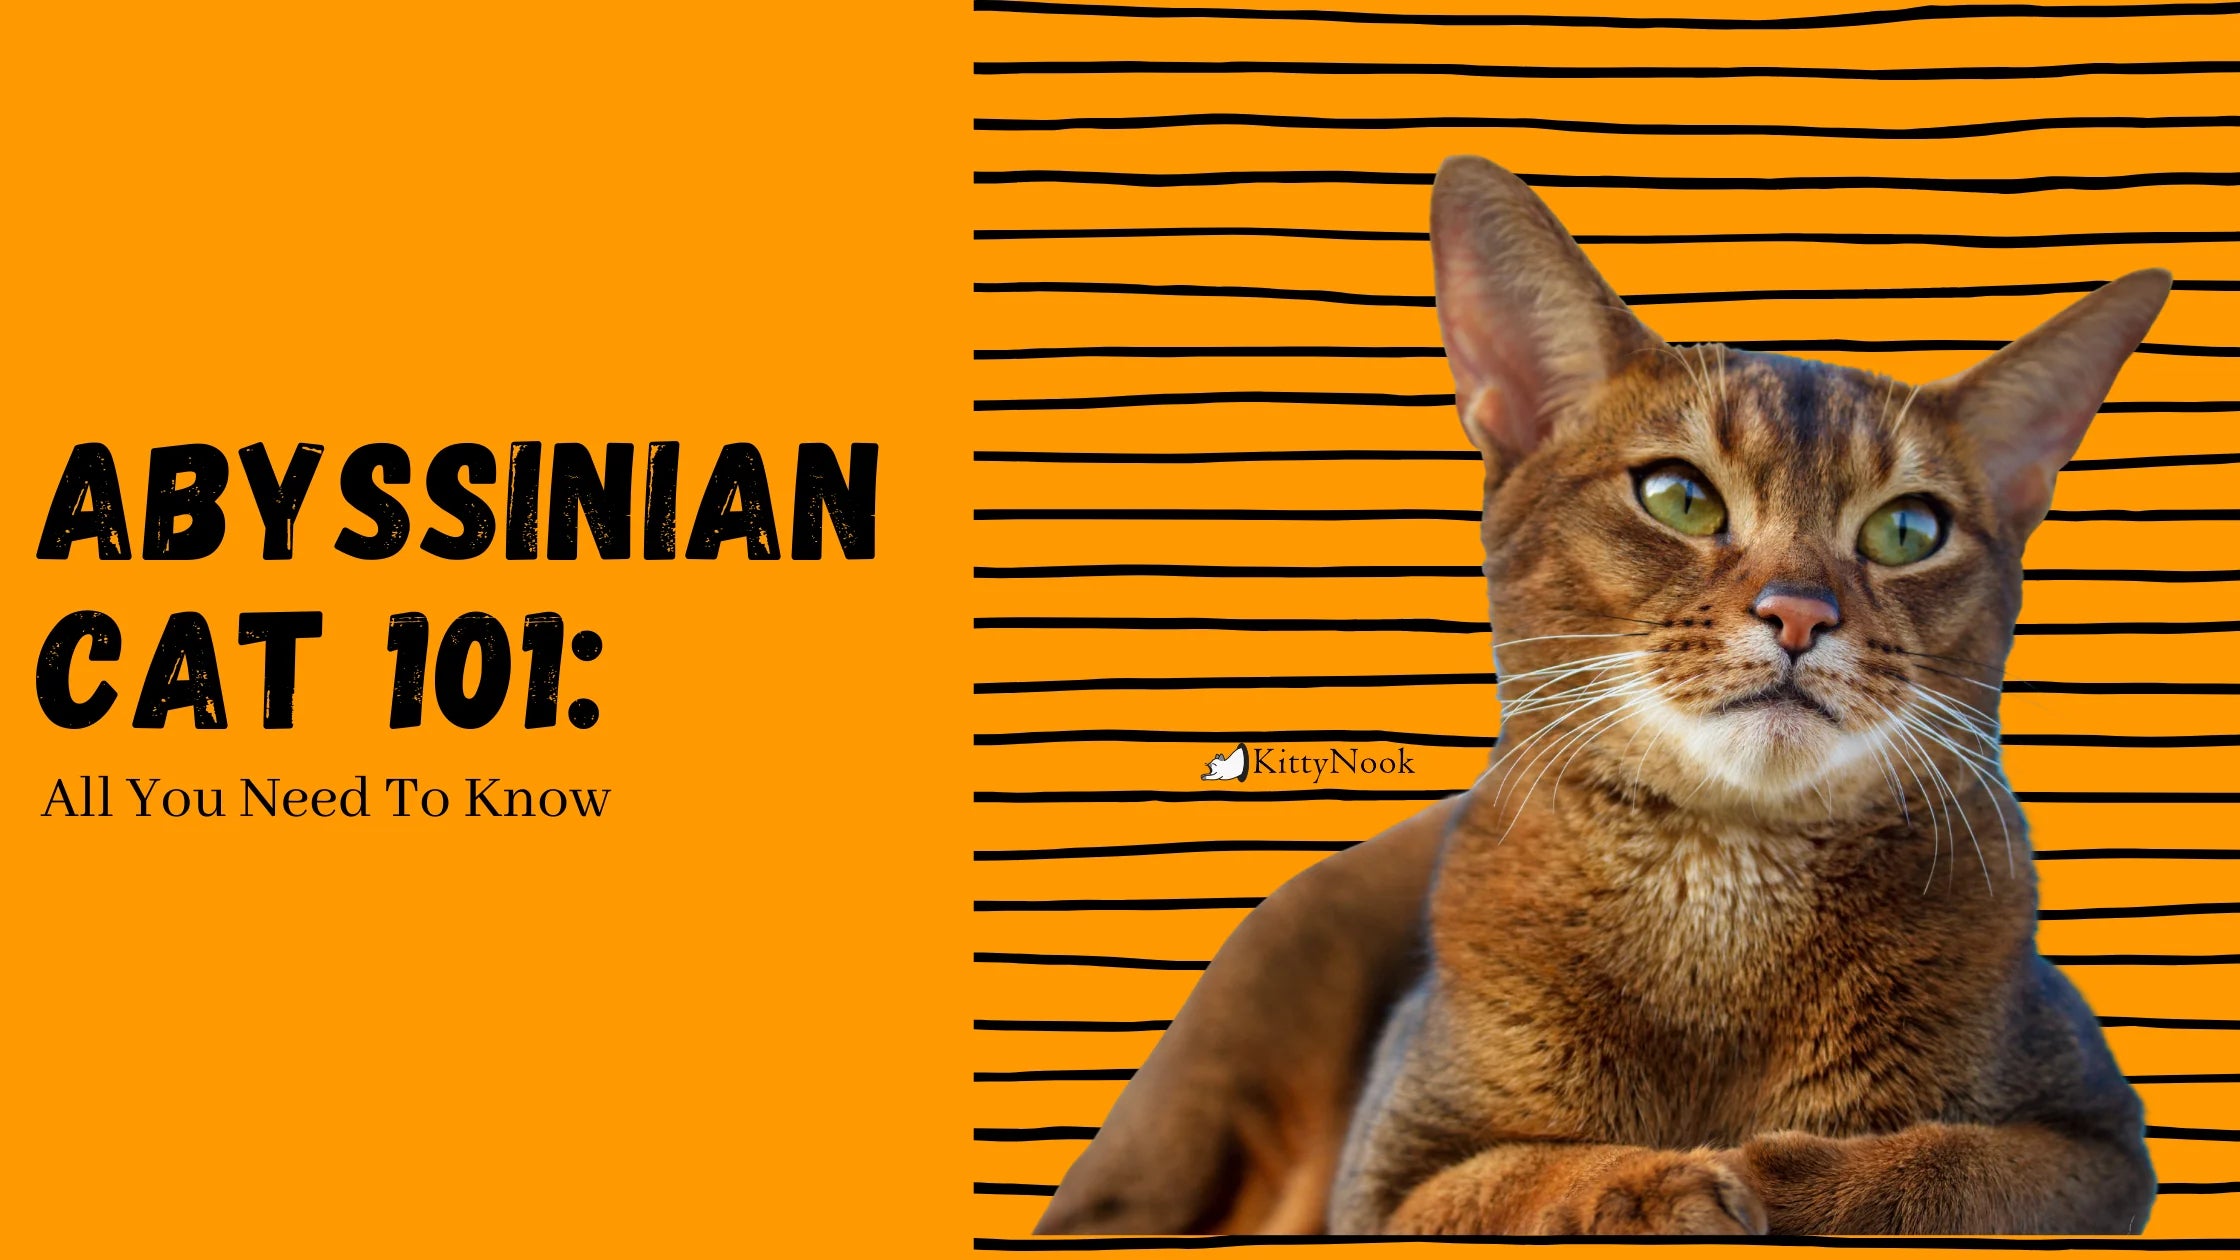 Abyssinian Cat 101: All You Need To Know - KittyNook Cat Company